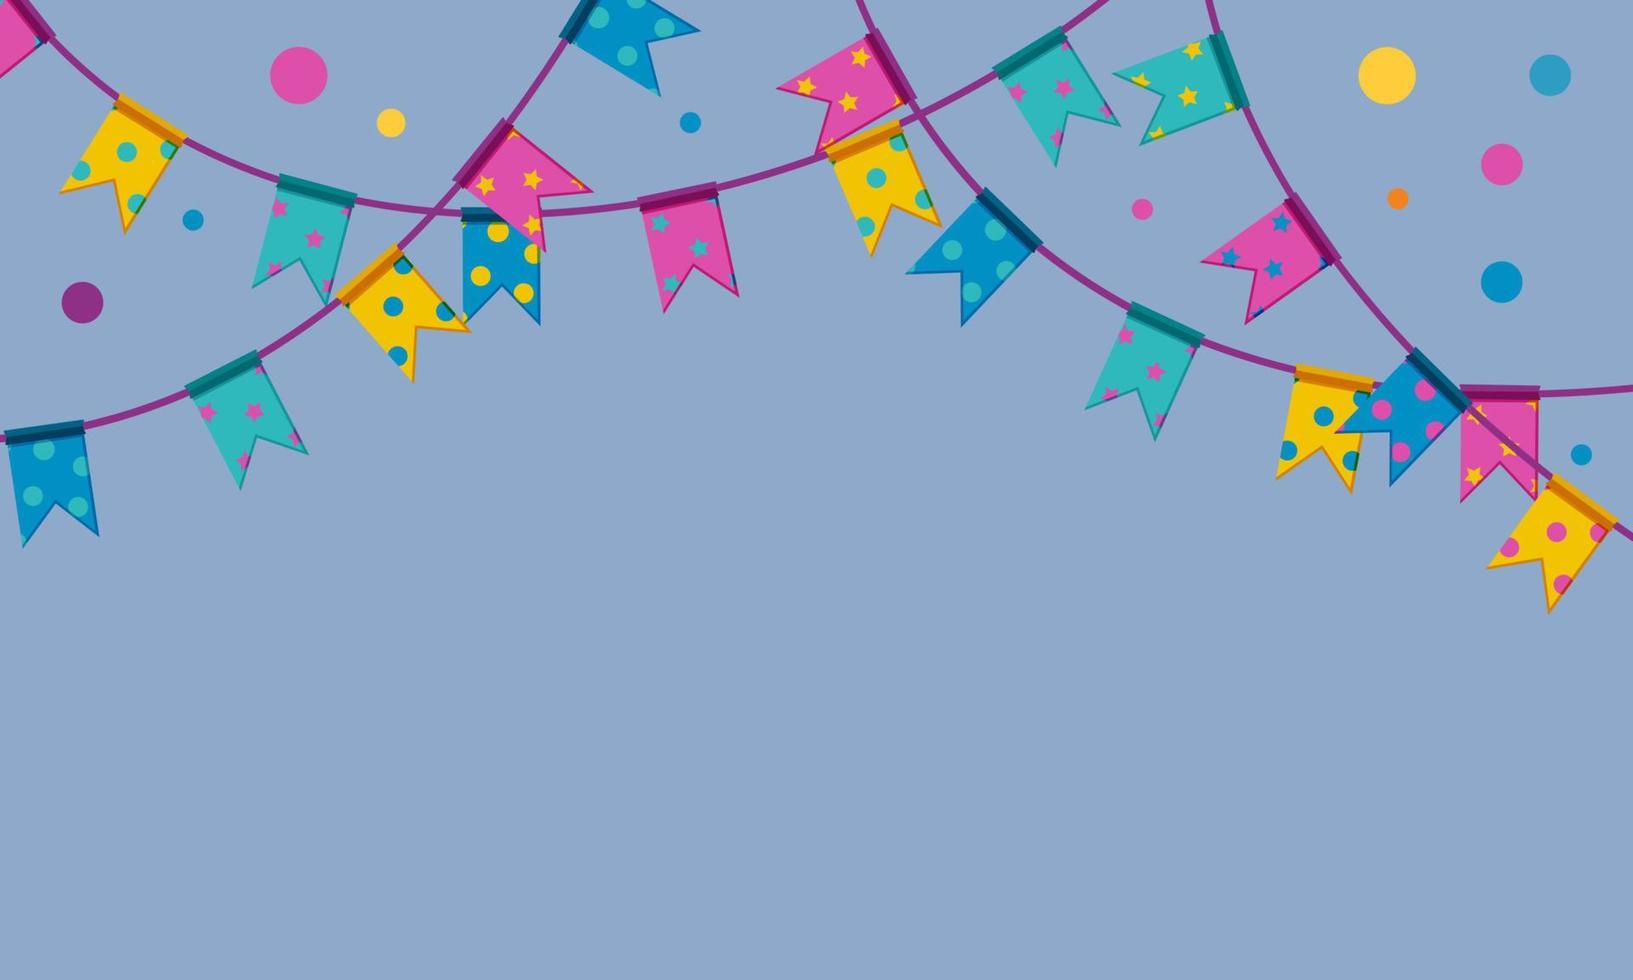 Festival garlands with confetti. Flags on string hanging from above. Upper frame for banners. Vector illustration